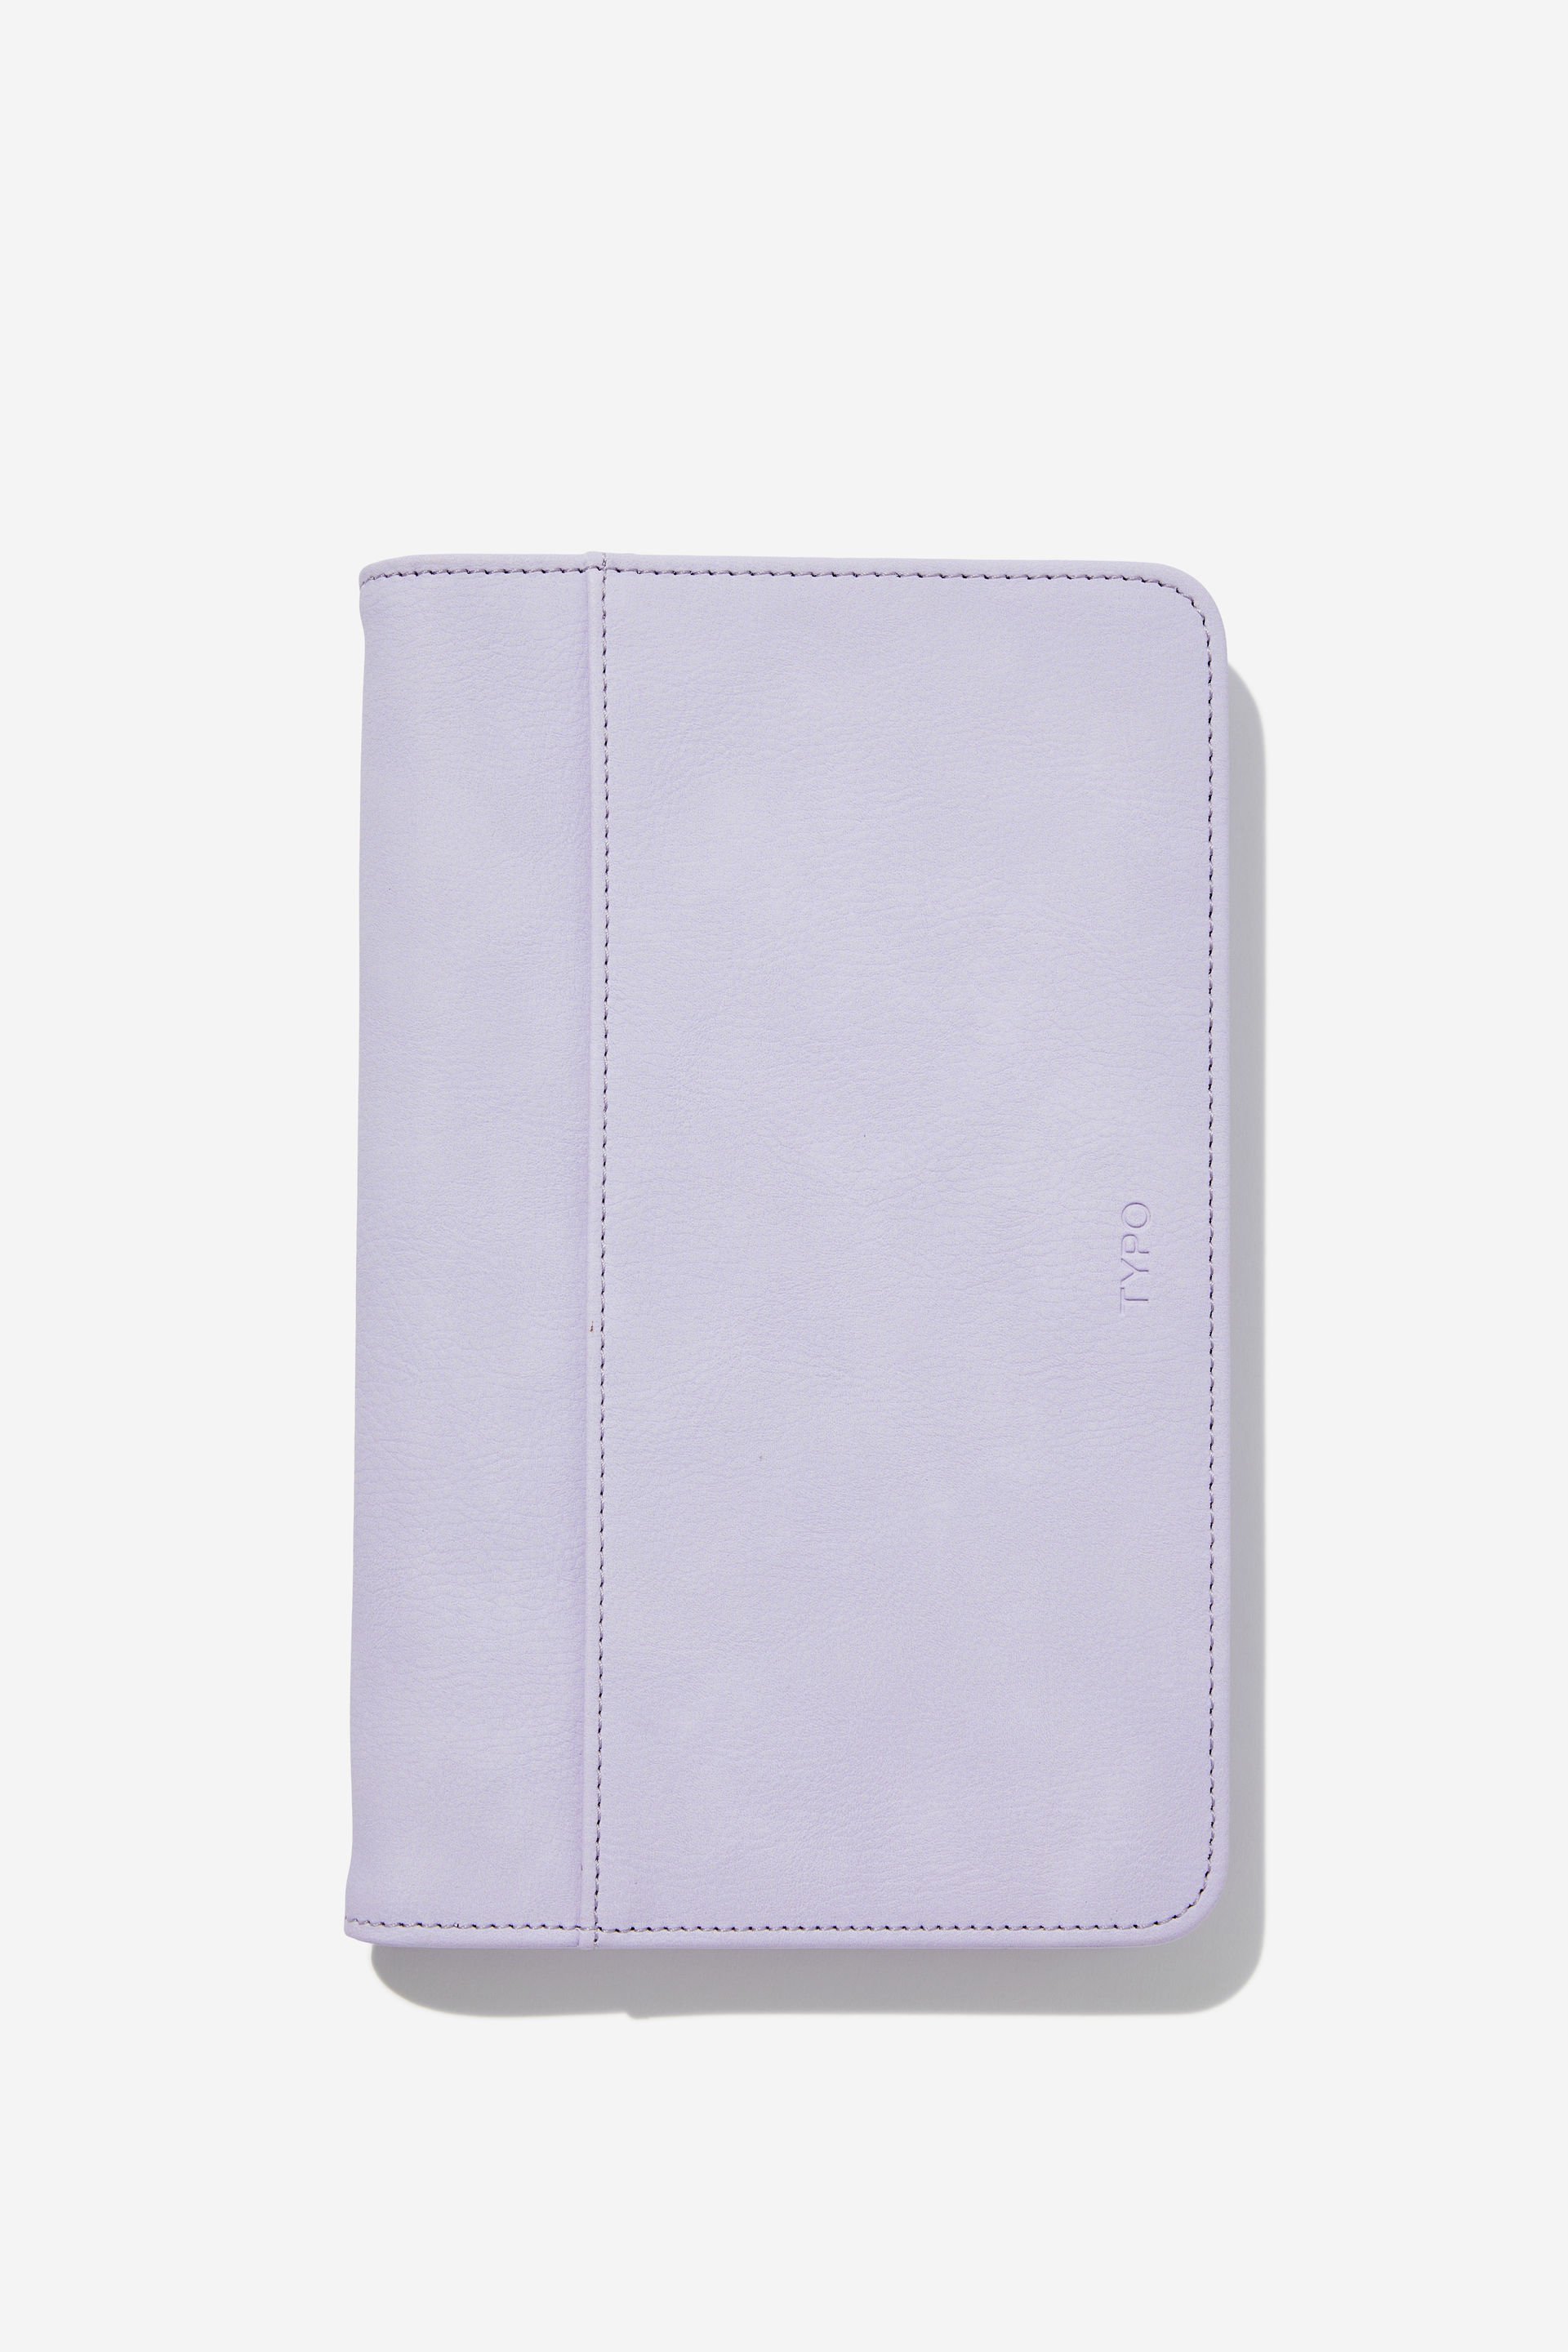 Typo - Off The Grid Travel Wallet - Soft lilac